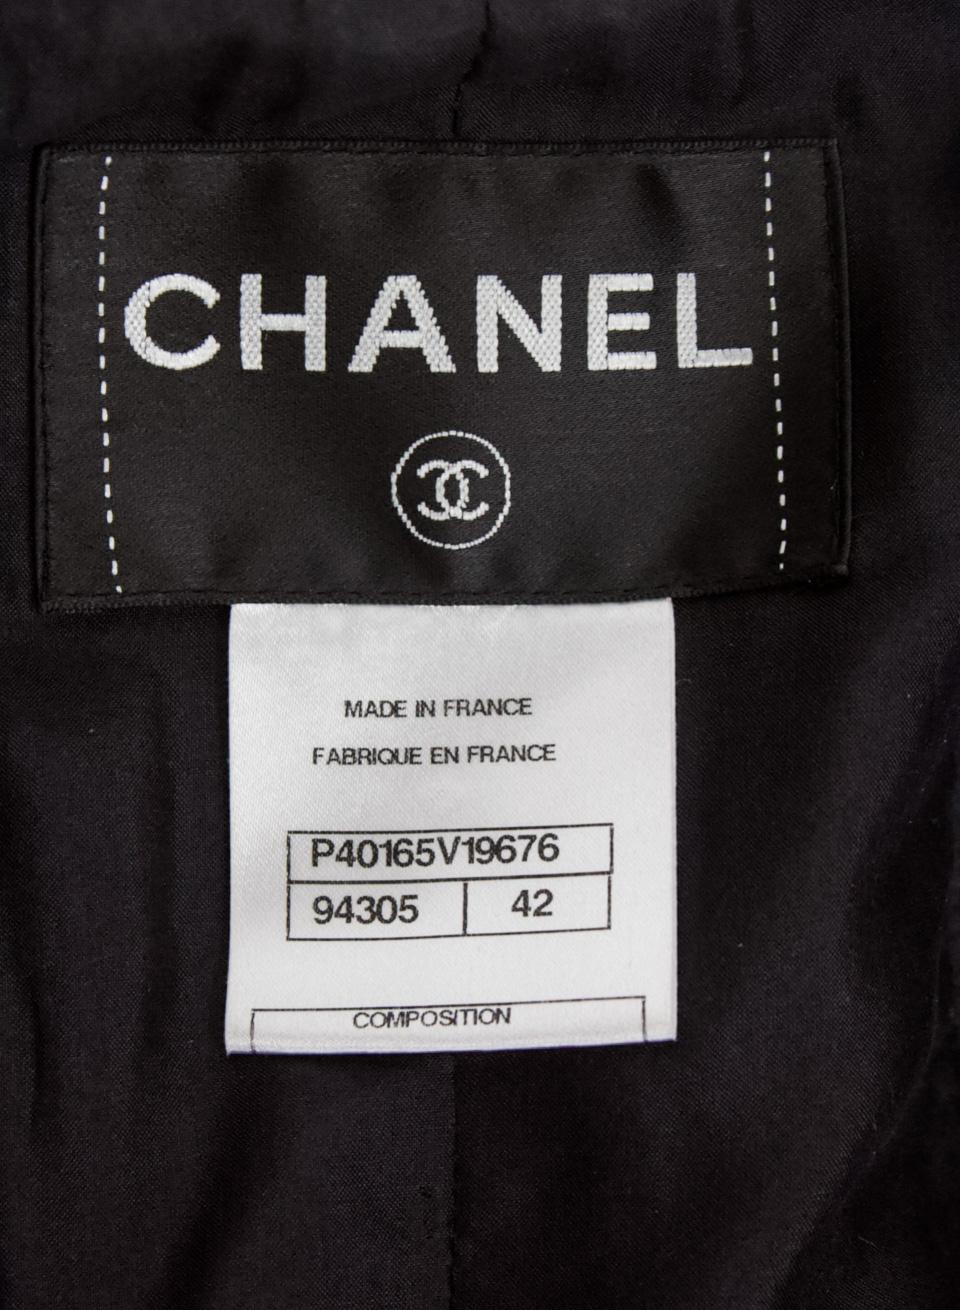 Chanel by Karl Lagerfeld Little Black Jacket, Cruise 2011 For Sale 3